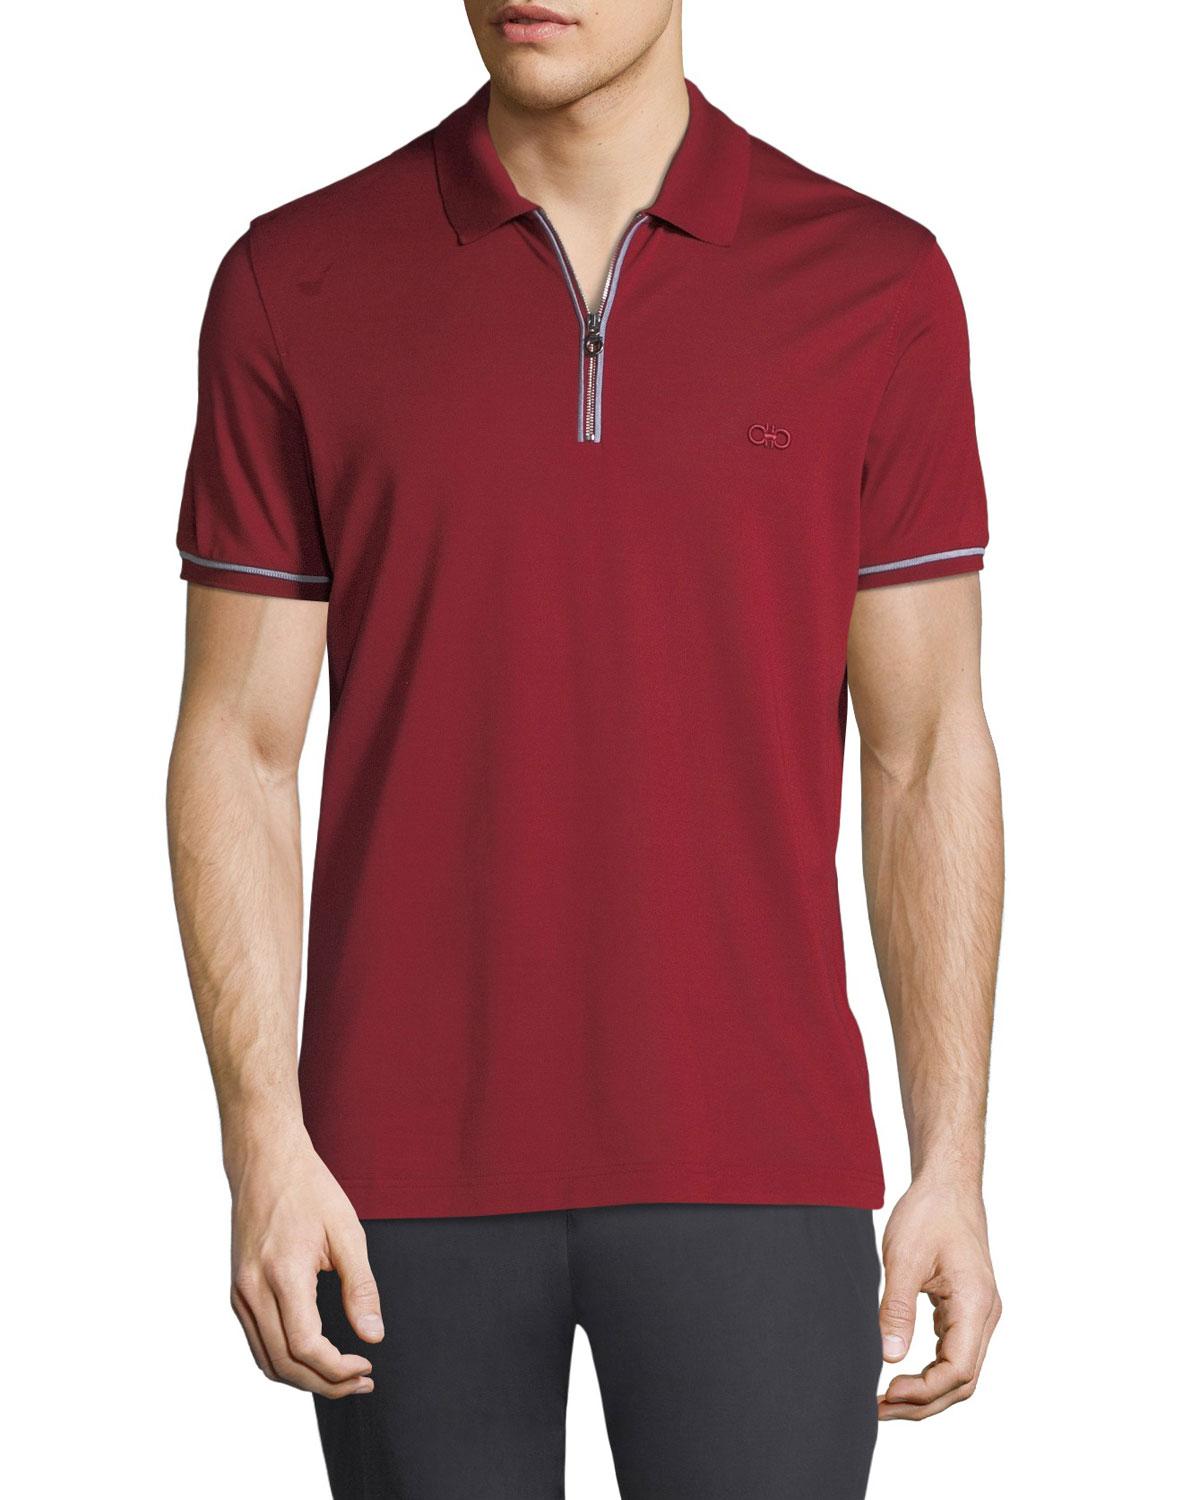 Lyst - Ferragamo Men's Tipped Zip-up Polo Shirt in Red for Men